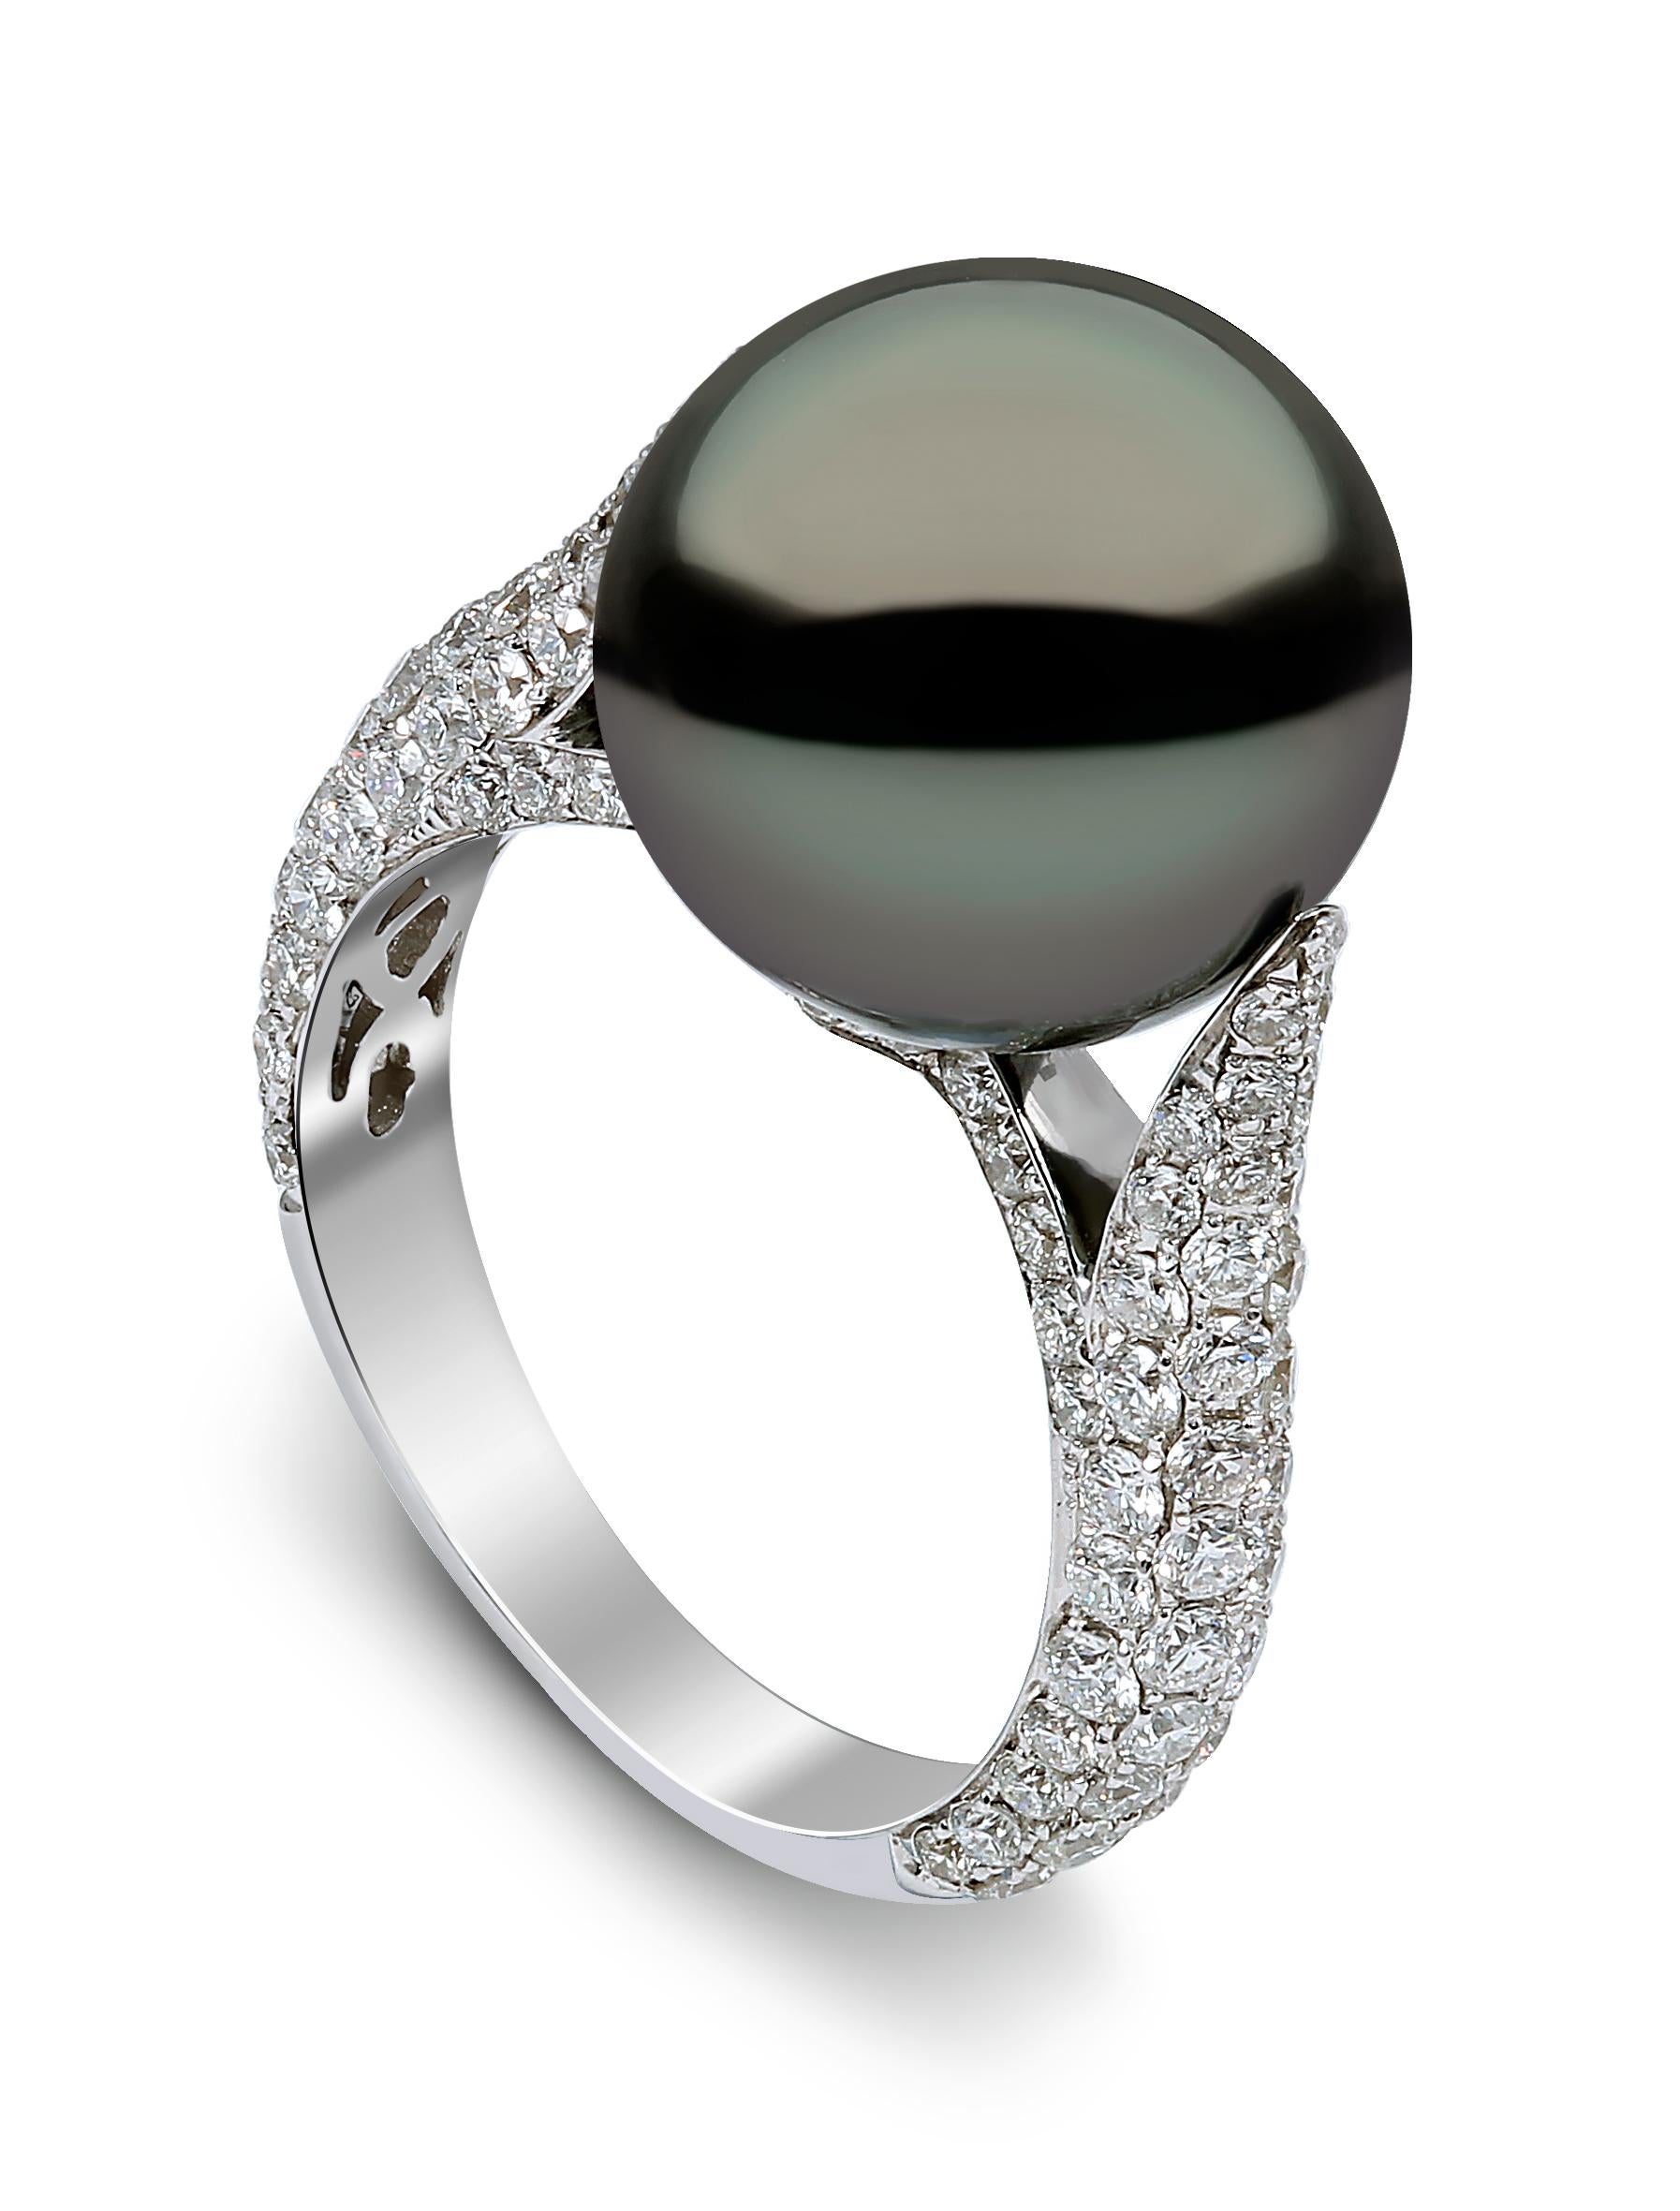 This mesmeric ring by Yoko London features a spectacular 13.3mm Tahitian pearl set amongst scintillating pave diamonds. Designed and hand finished in our London atelier, this unique ring has been finished to the highest standard. Striking and